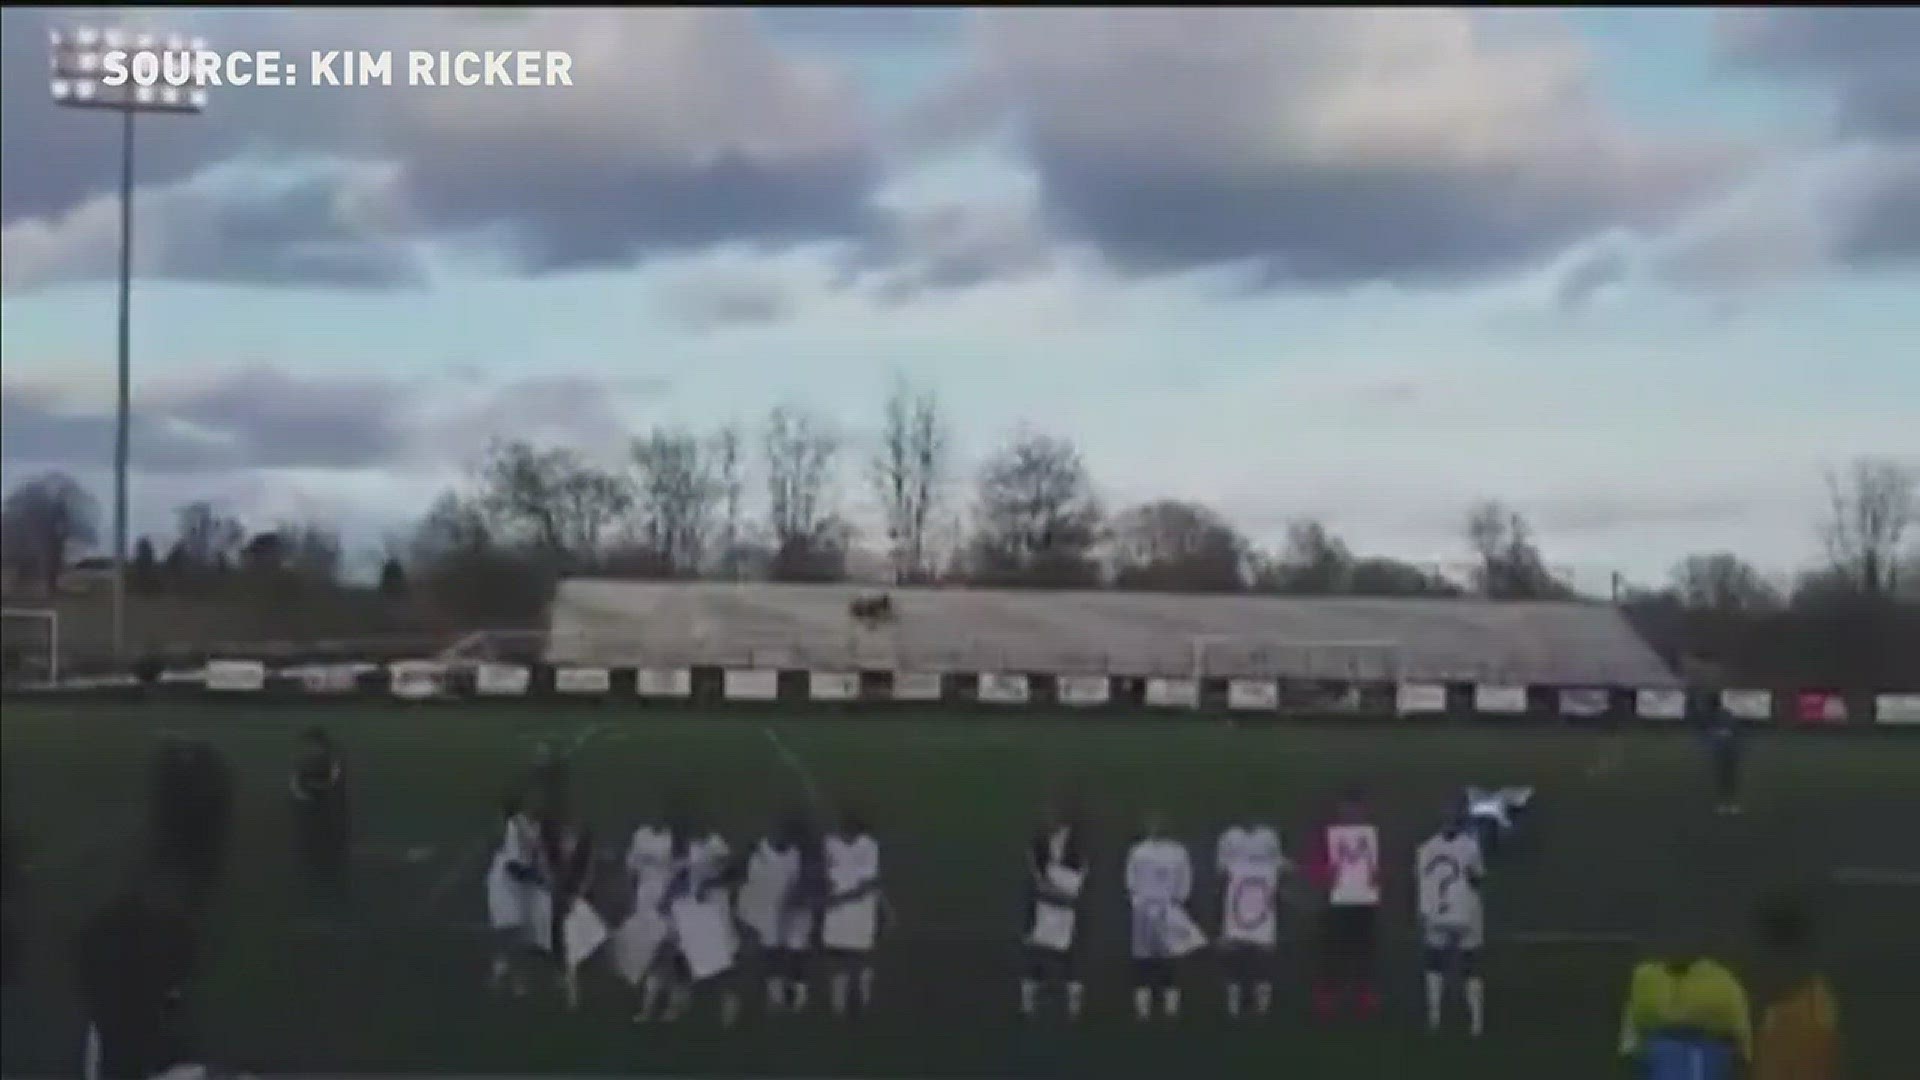 On April 21, during halftime of the girls varsity soccer match, Megan Dreyer (who plays on the team) recruited ten of her teammates to help her ask her friend, Brison Ricker to prom. Megan and the players each held up a sign with a letter on it.